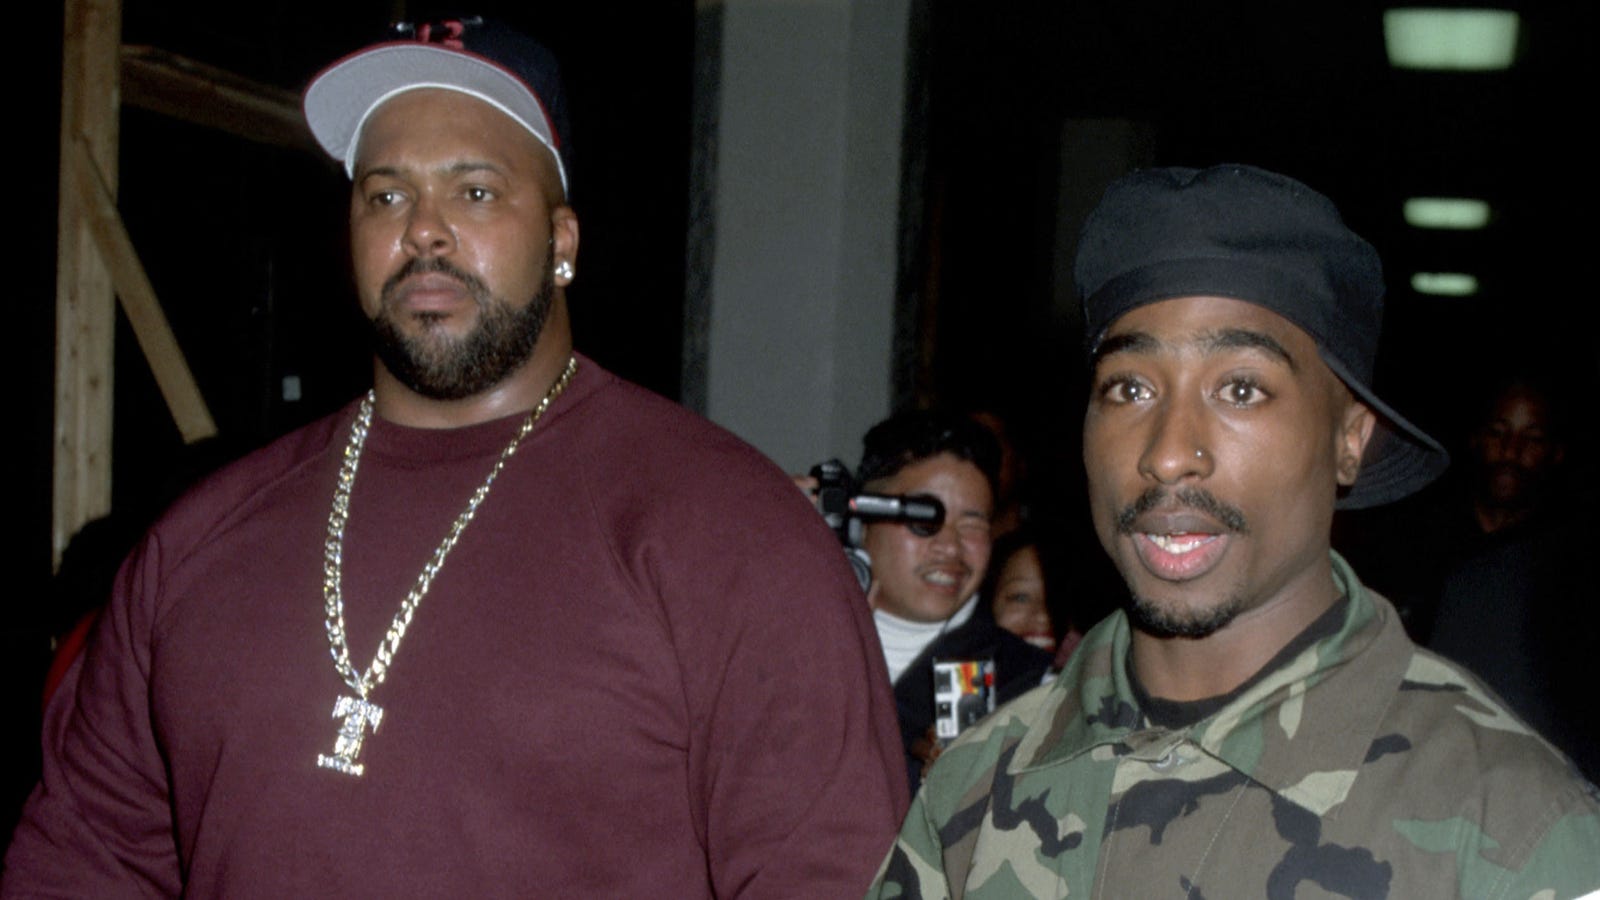 Tupac is alive and living in Malaysia, according to Suge Knight's son